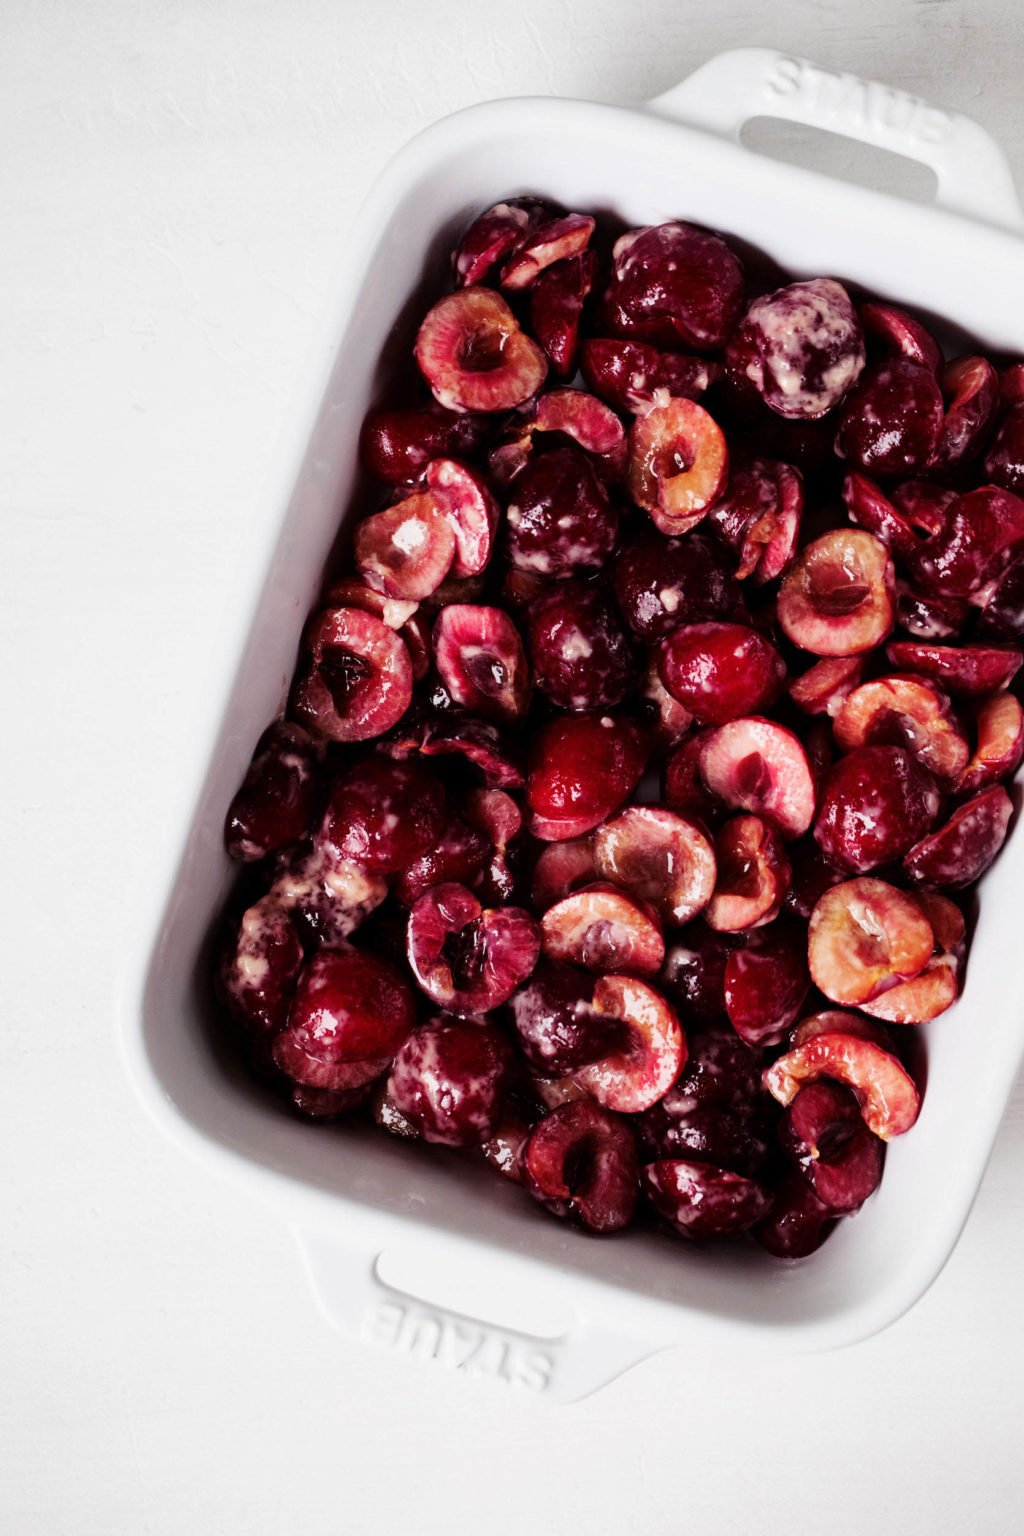 A white, rectangular baking dish is filled with deep red cherries that have been coated with sugar.